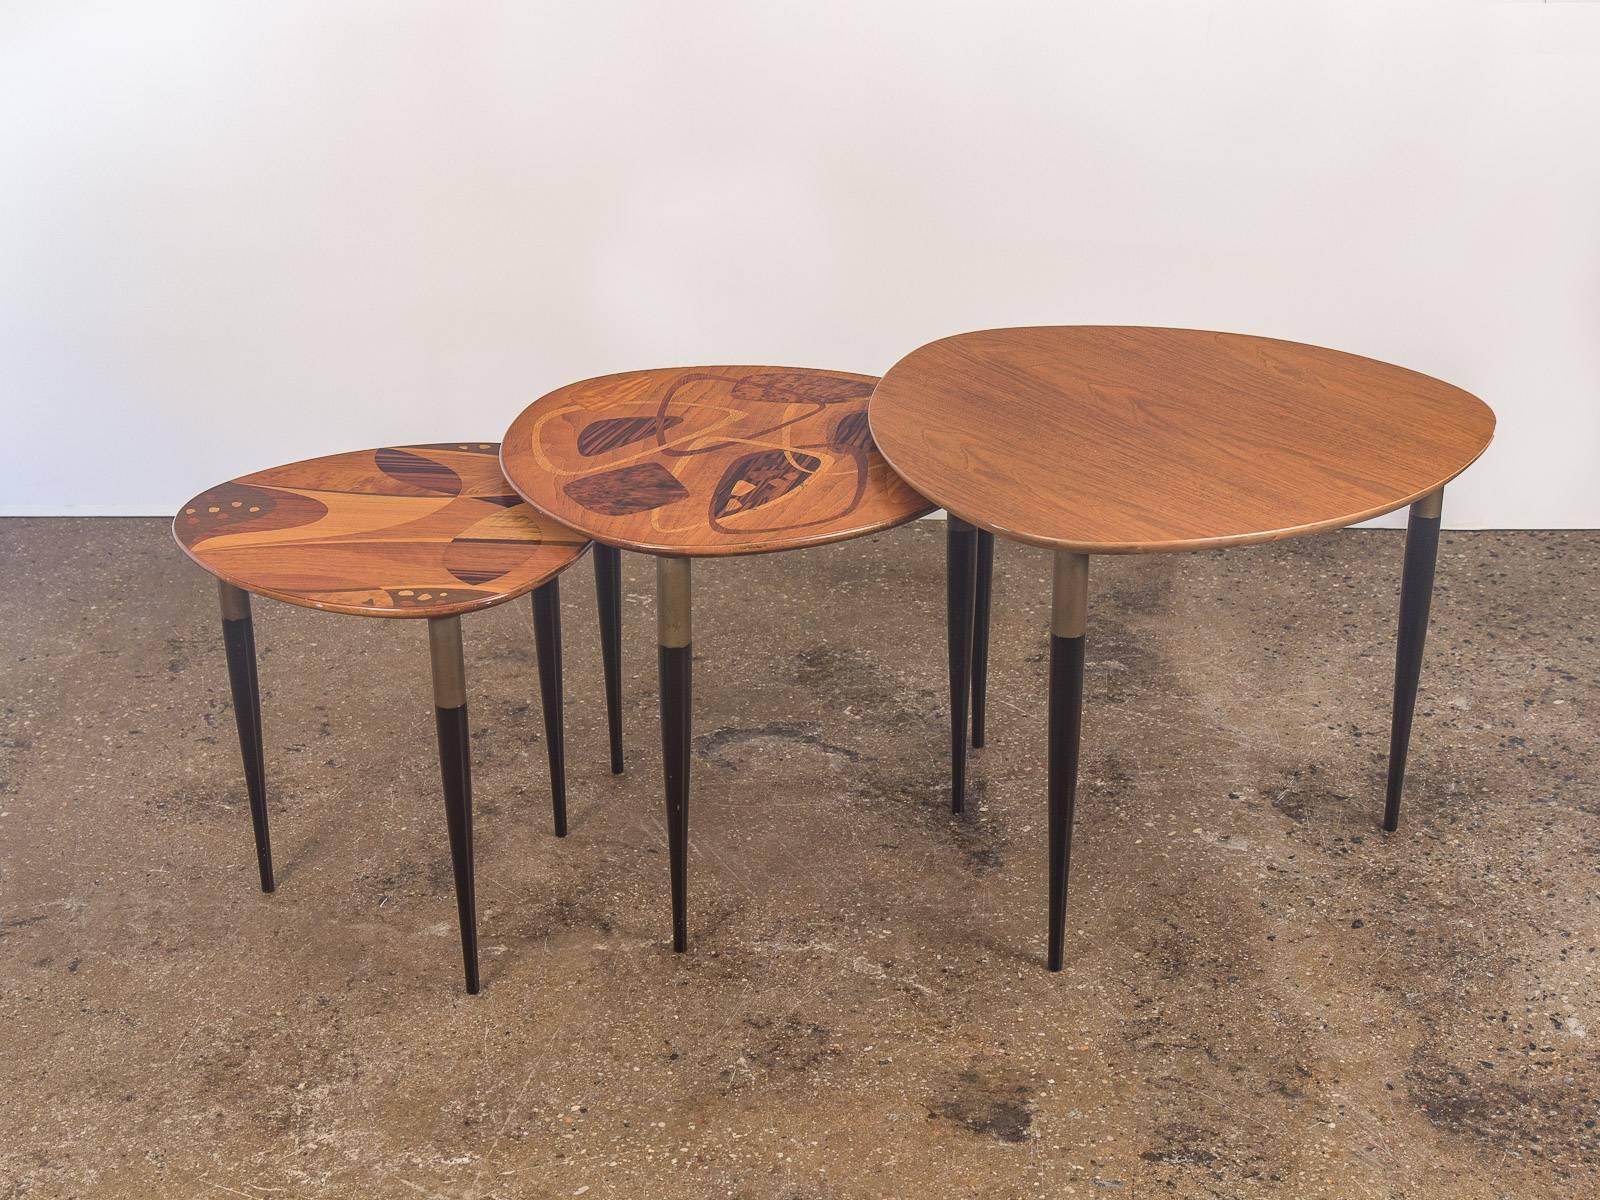 Scarce 1950s nesting tables by architect and designer Erno Fabry. Apprentice to Industrial modern designer Norman Bel Geddes, Fabrys own method evolved by coupling European materiality and Bauhausian clarity. His design approach can be seen in the